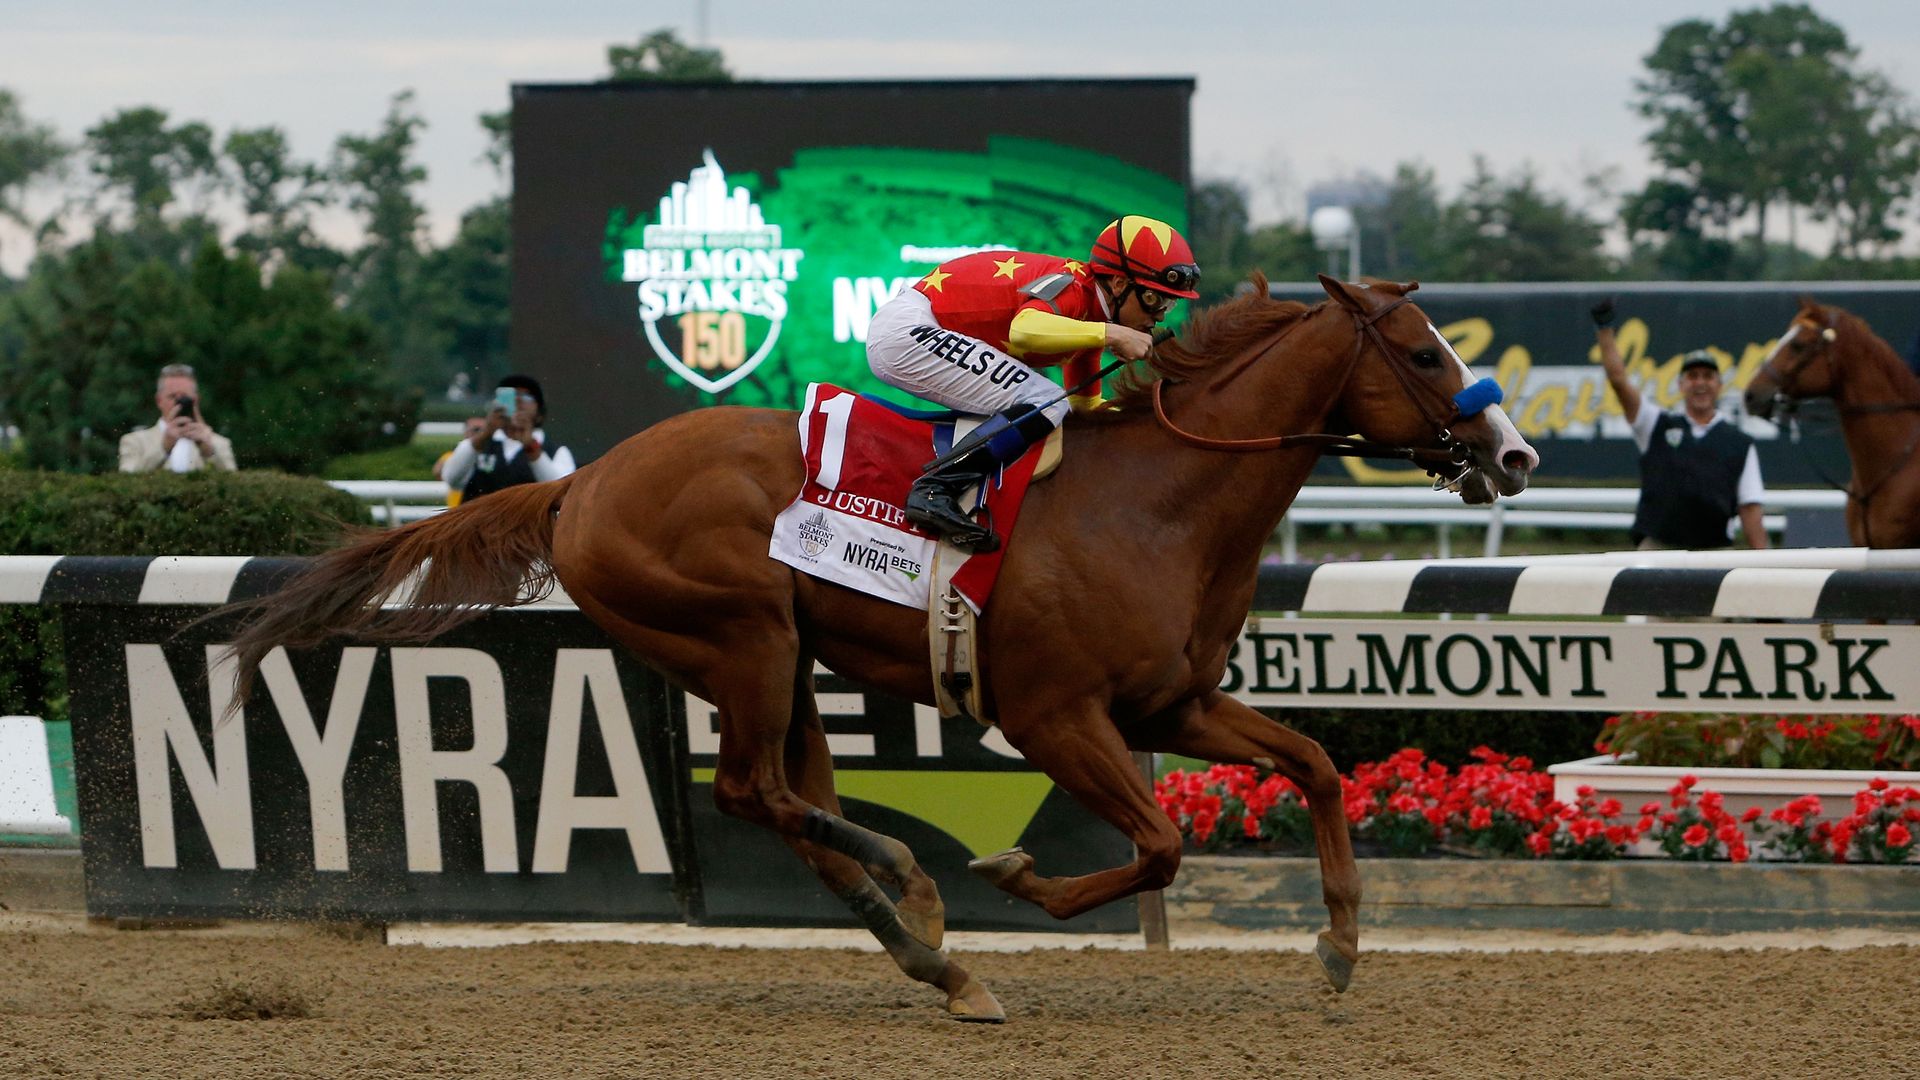 : Justify #1, ridden by jockey Mike Smith leads the field to the finish line to win the 150th running of the Belmont Stakes at Belmont Park on June 9, 2018 in Elmont, New York.